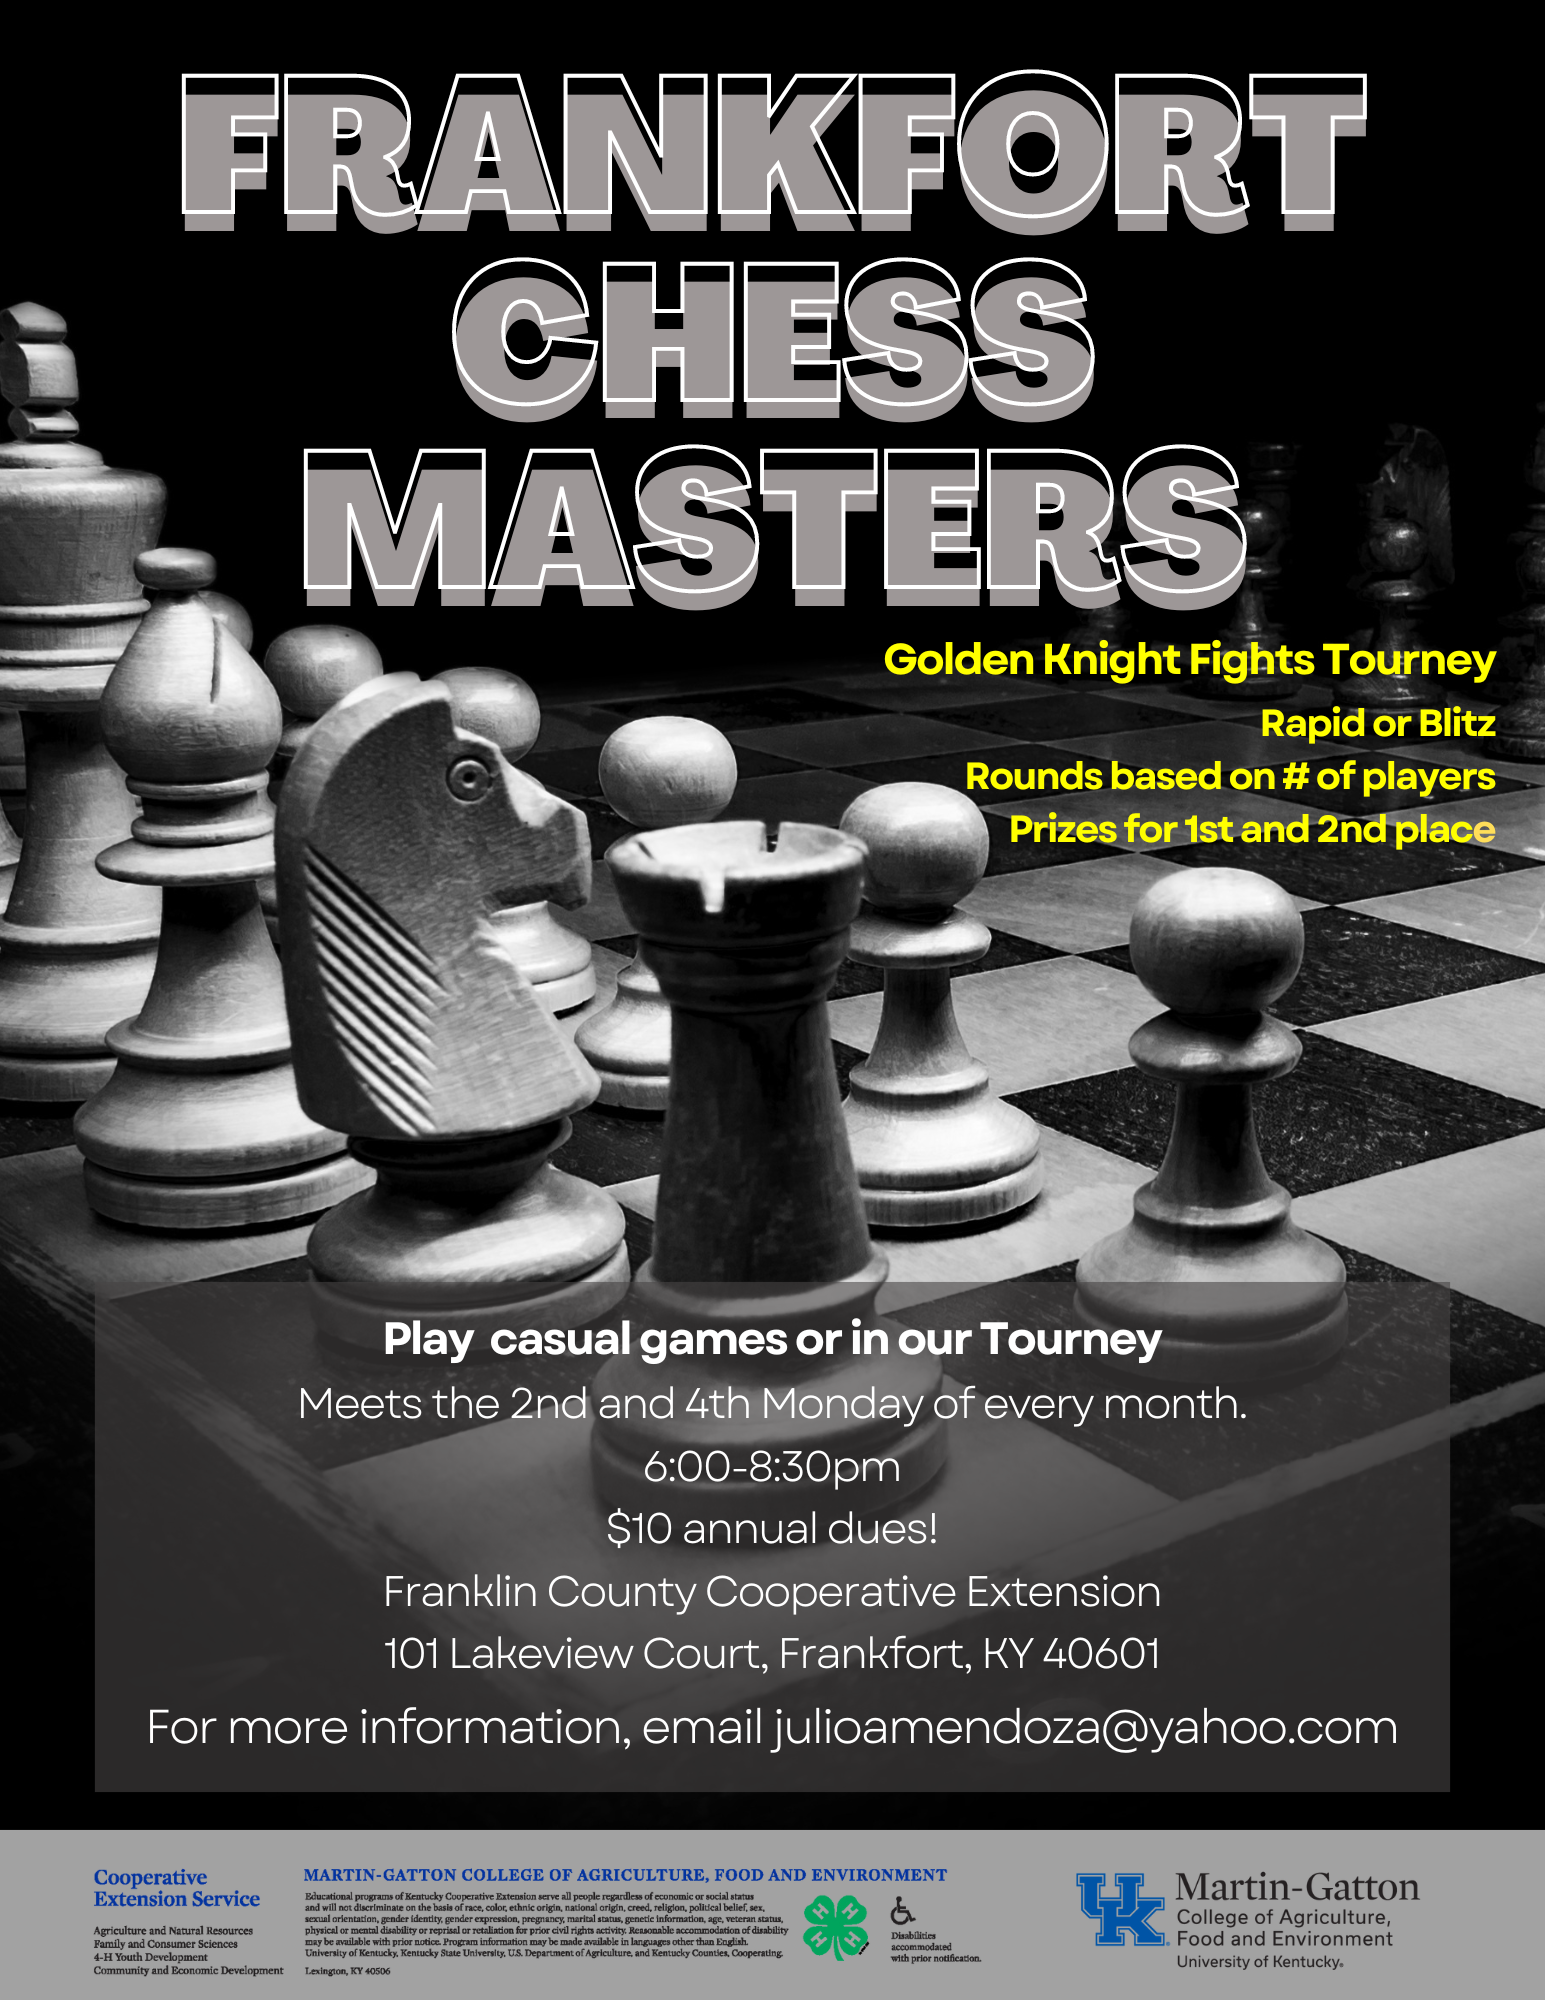 Frankfort Chess Master image 